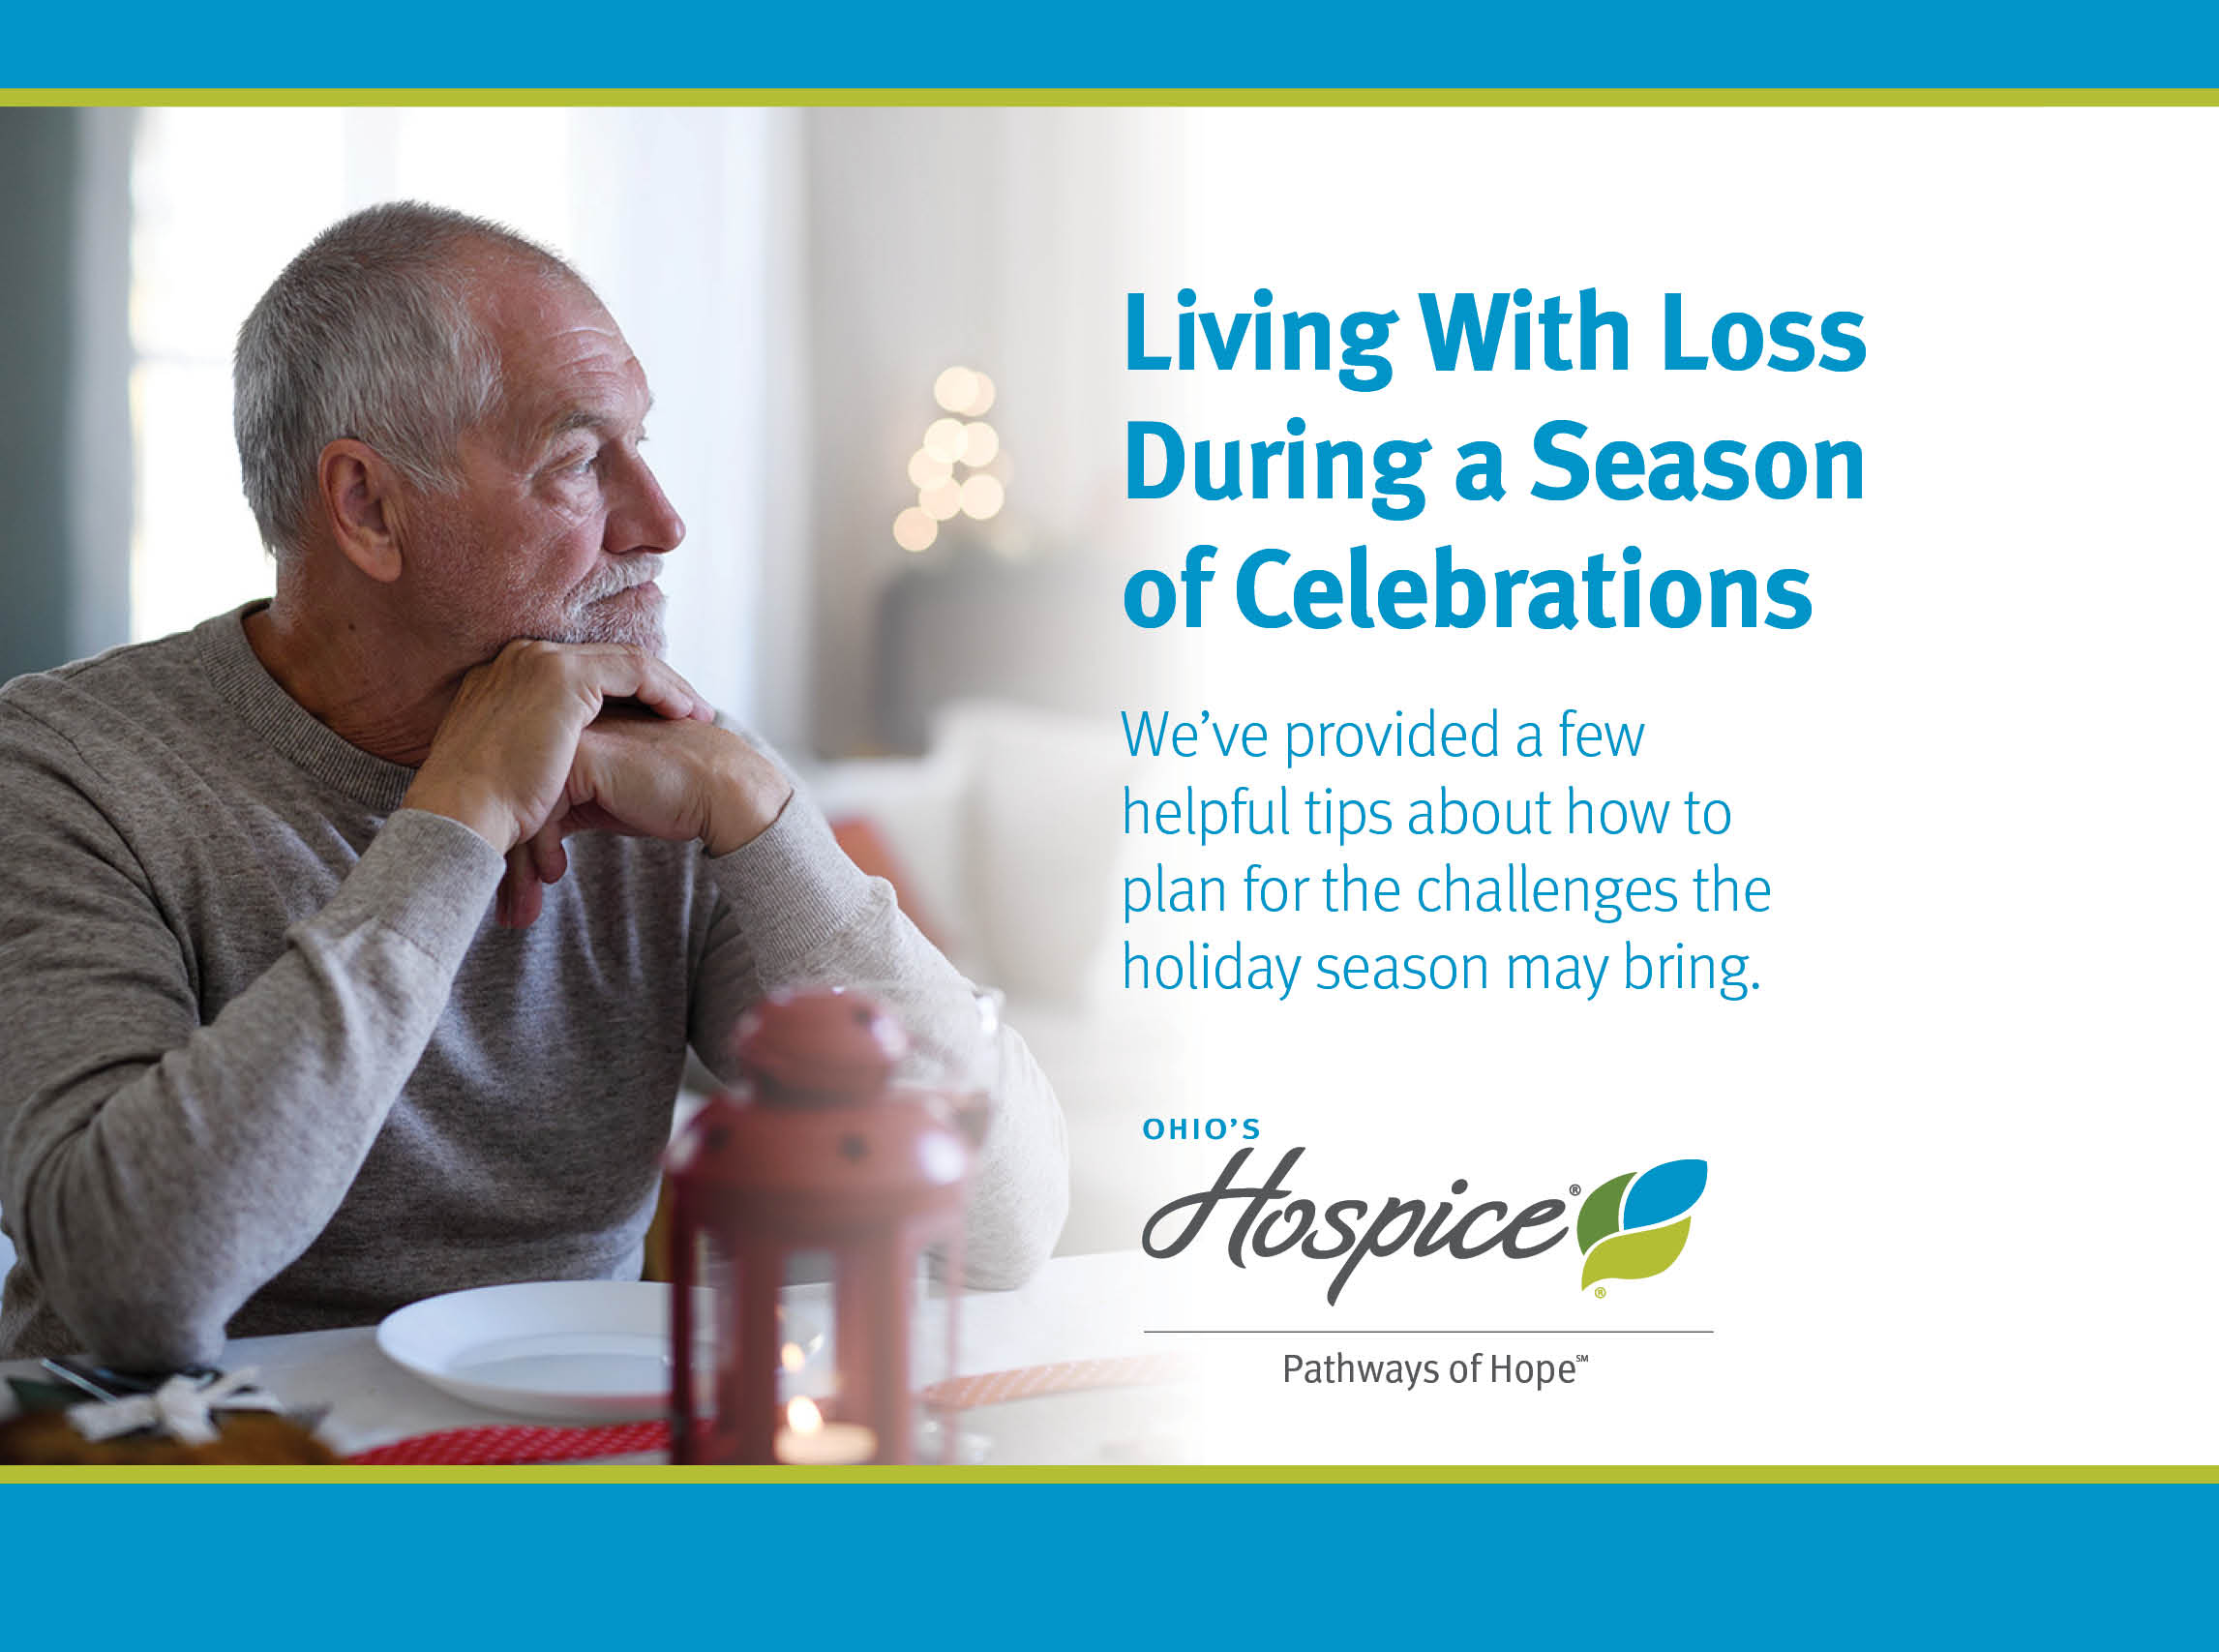 Living With Loss During a Season of Celebrations: We've provided a few helpful tips about how to plan for the challenges then holiday season may bring.